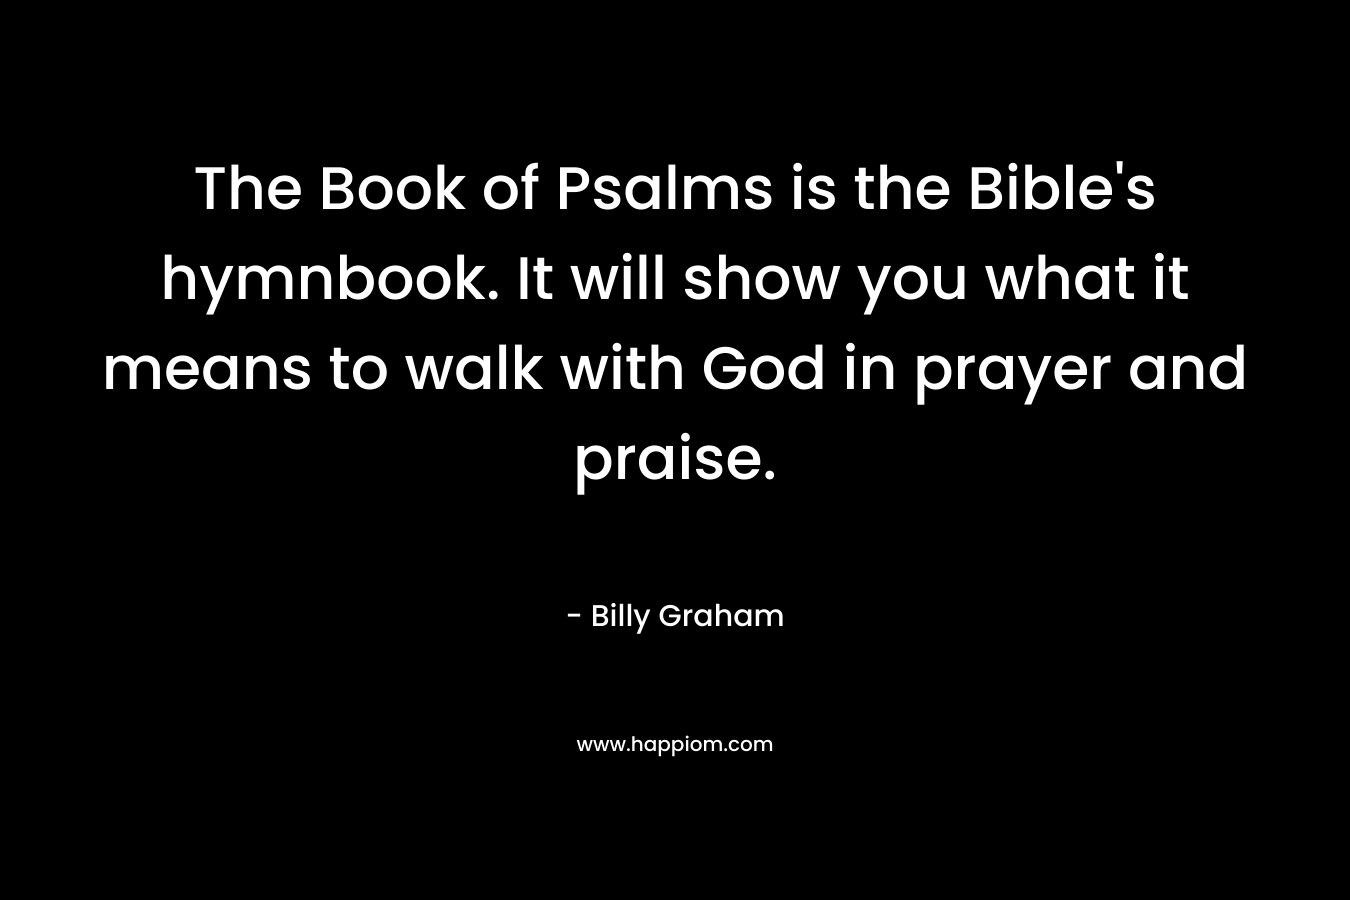 The Book of Psalms is the Bible’s hymnbook. It will show you what it means to walk with God in prayer and praise. – Billy Graham